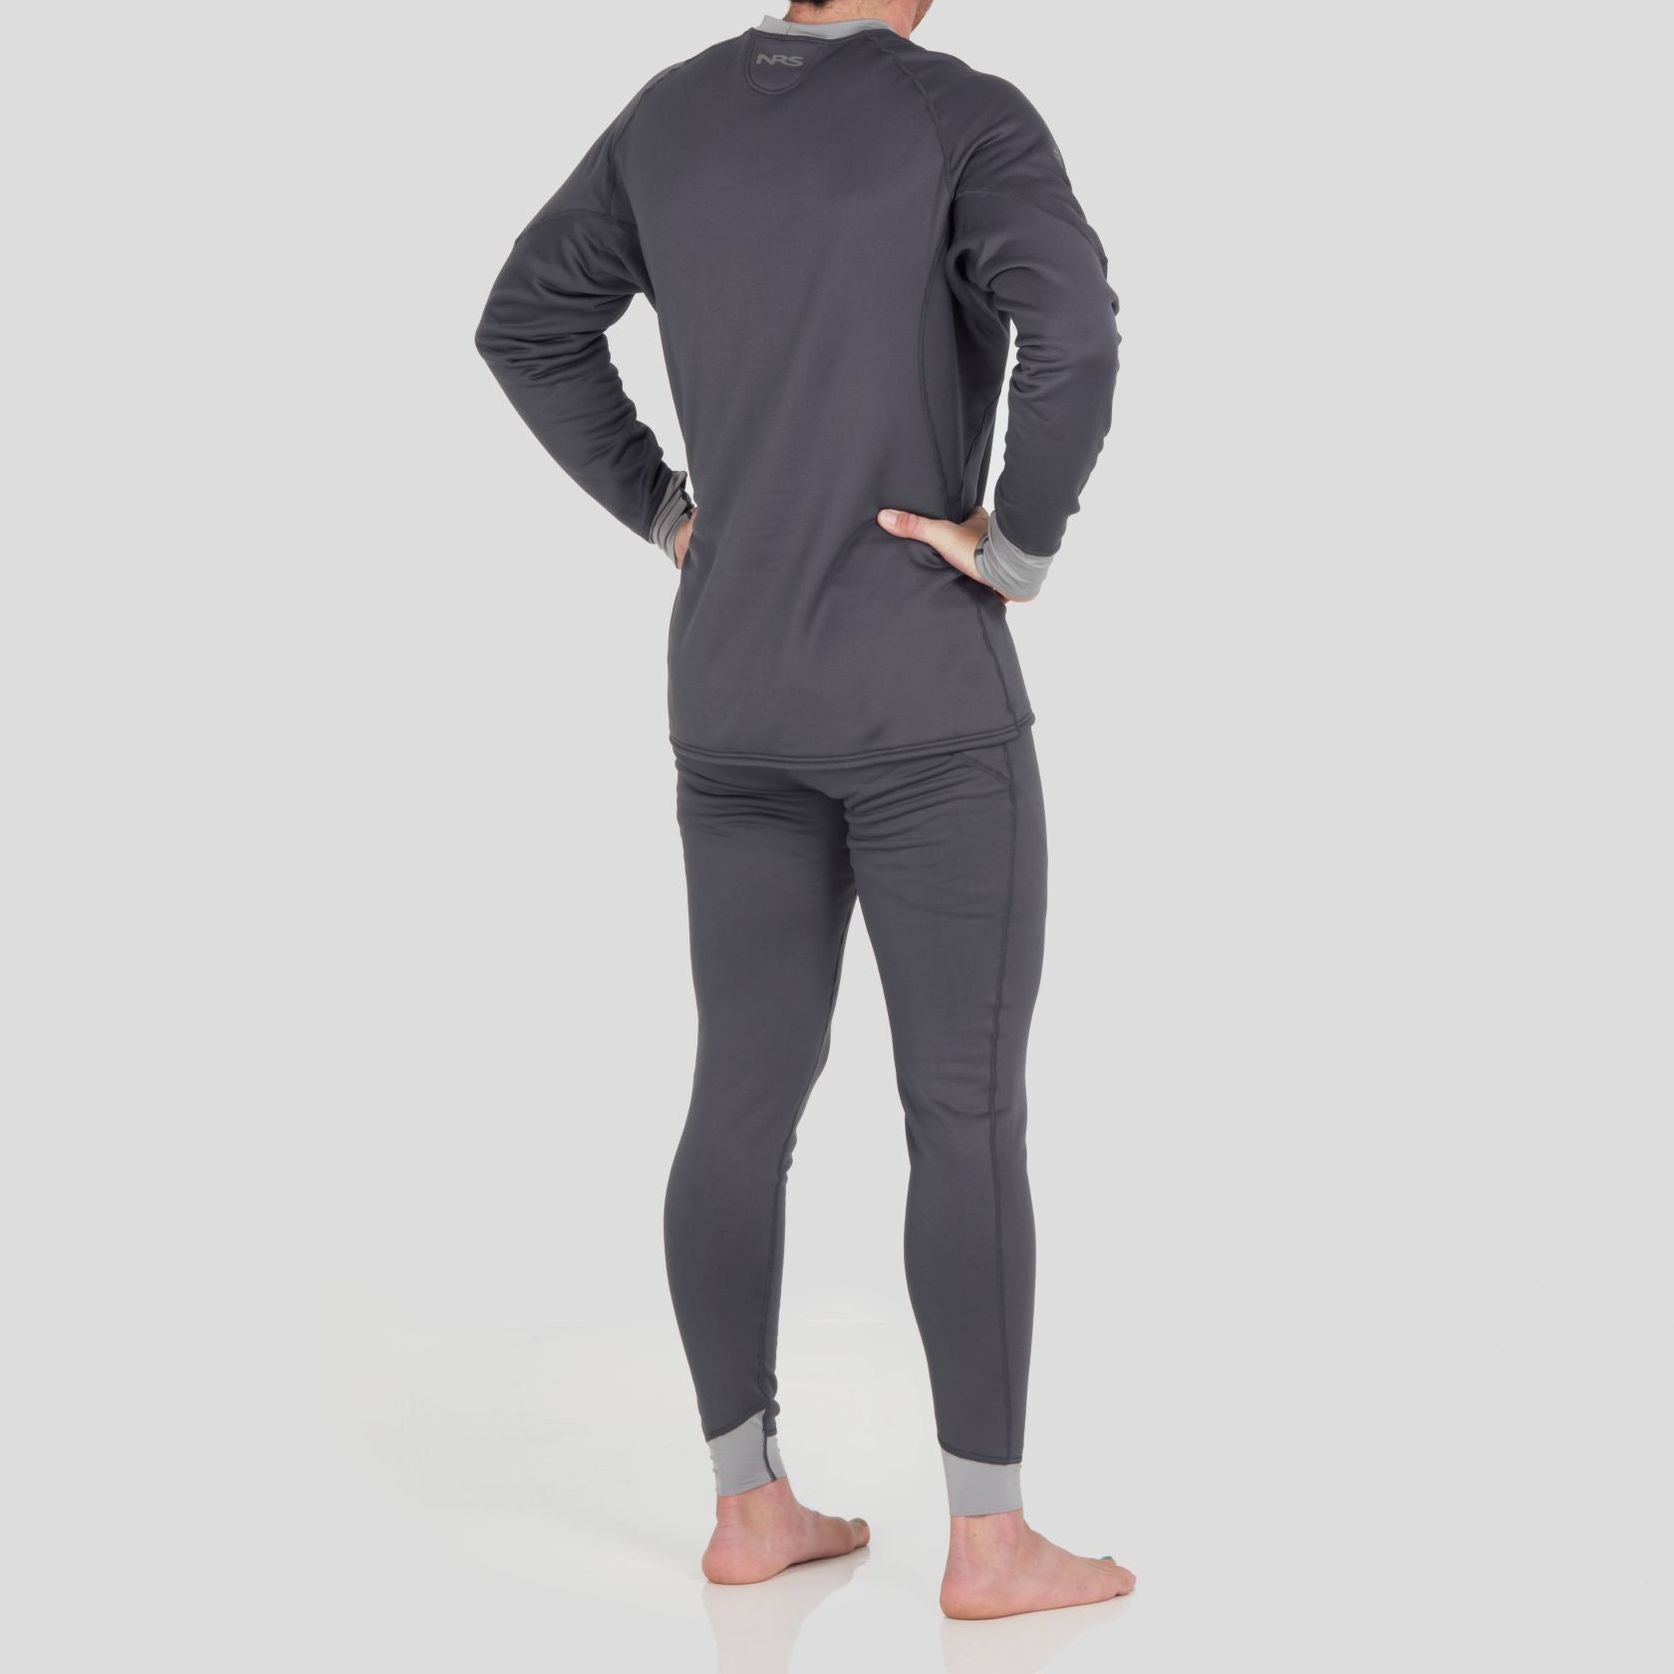 NRS Expedition Weight Union Base Layer Bukser, Herre